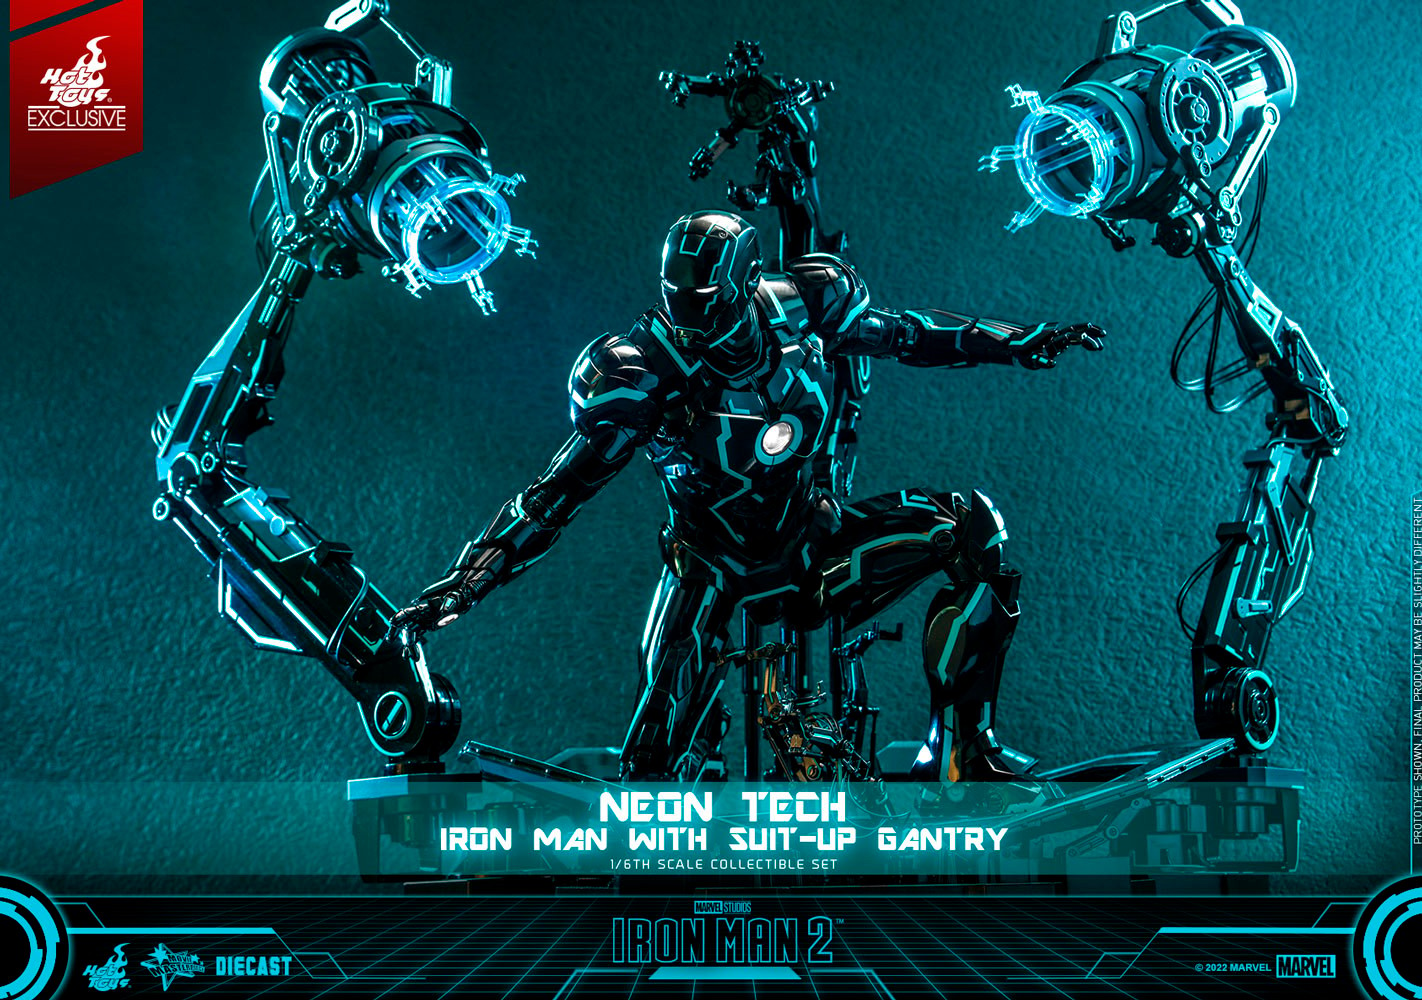 Neon Tech Iron Man with Suit-Up Gantry (Prototype Shown) View 8